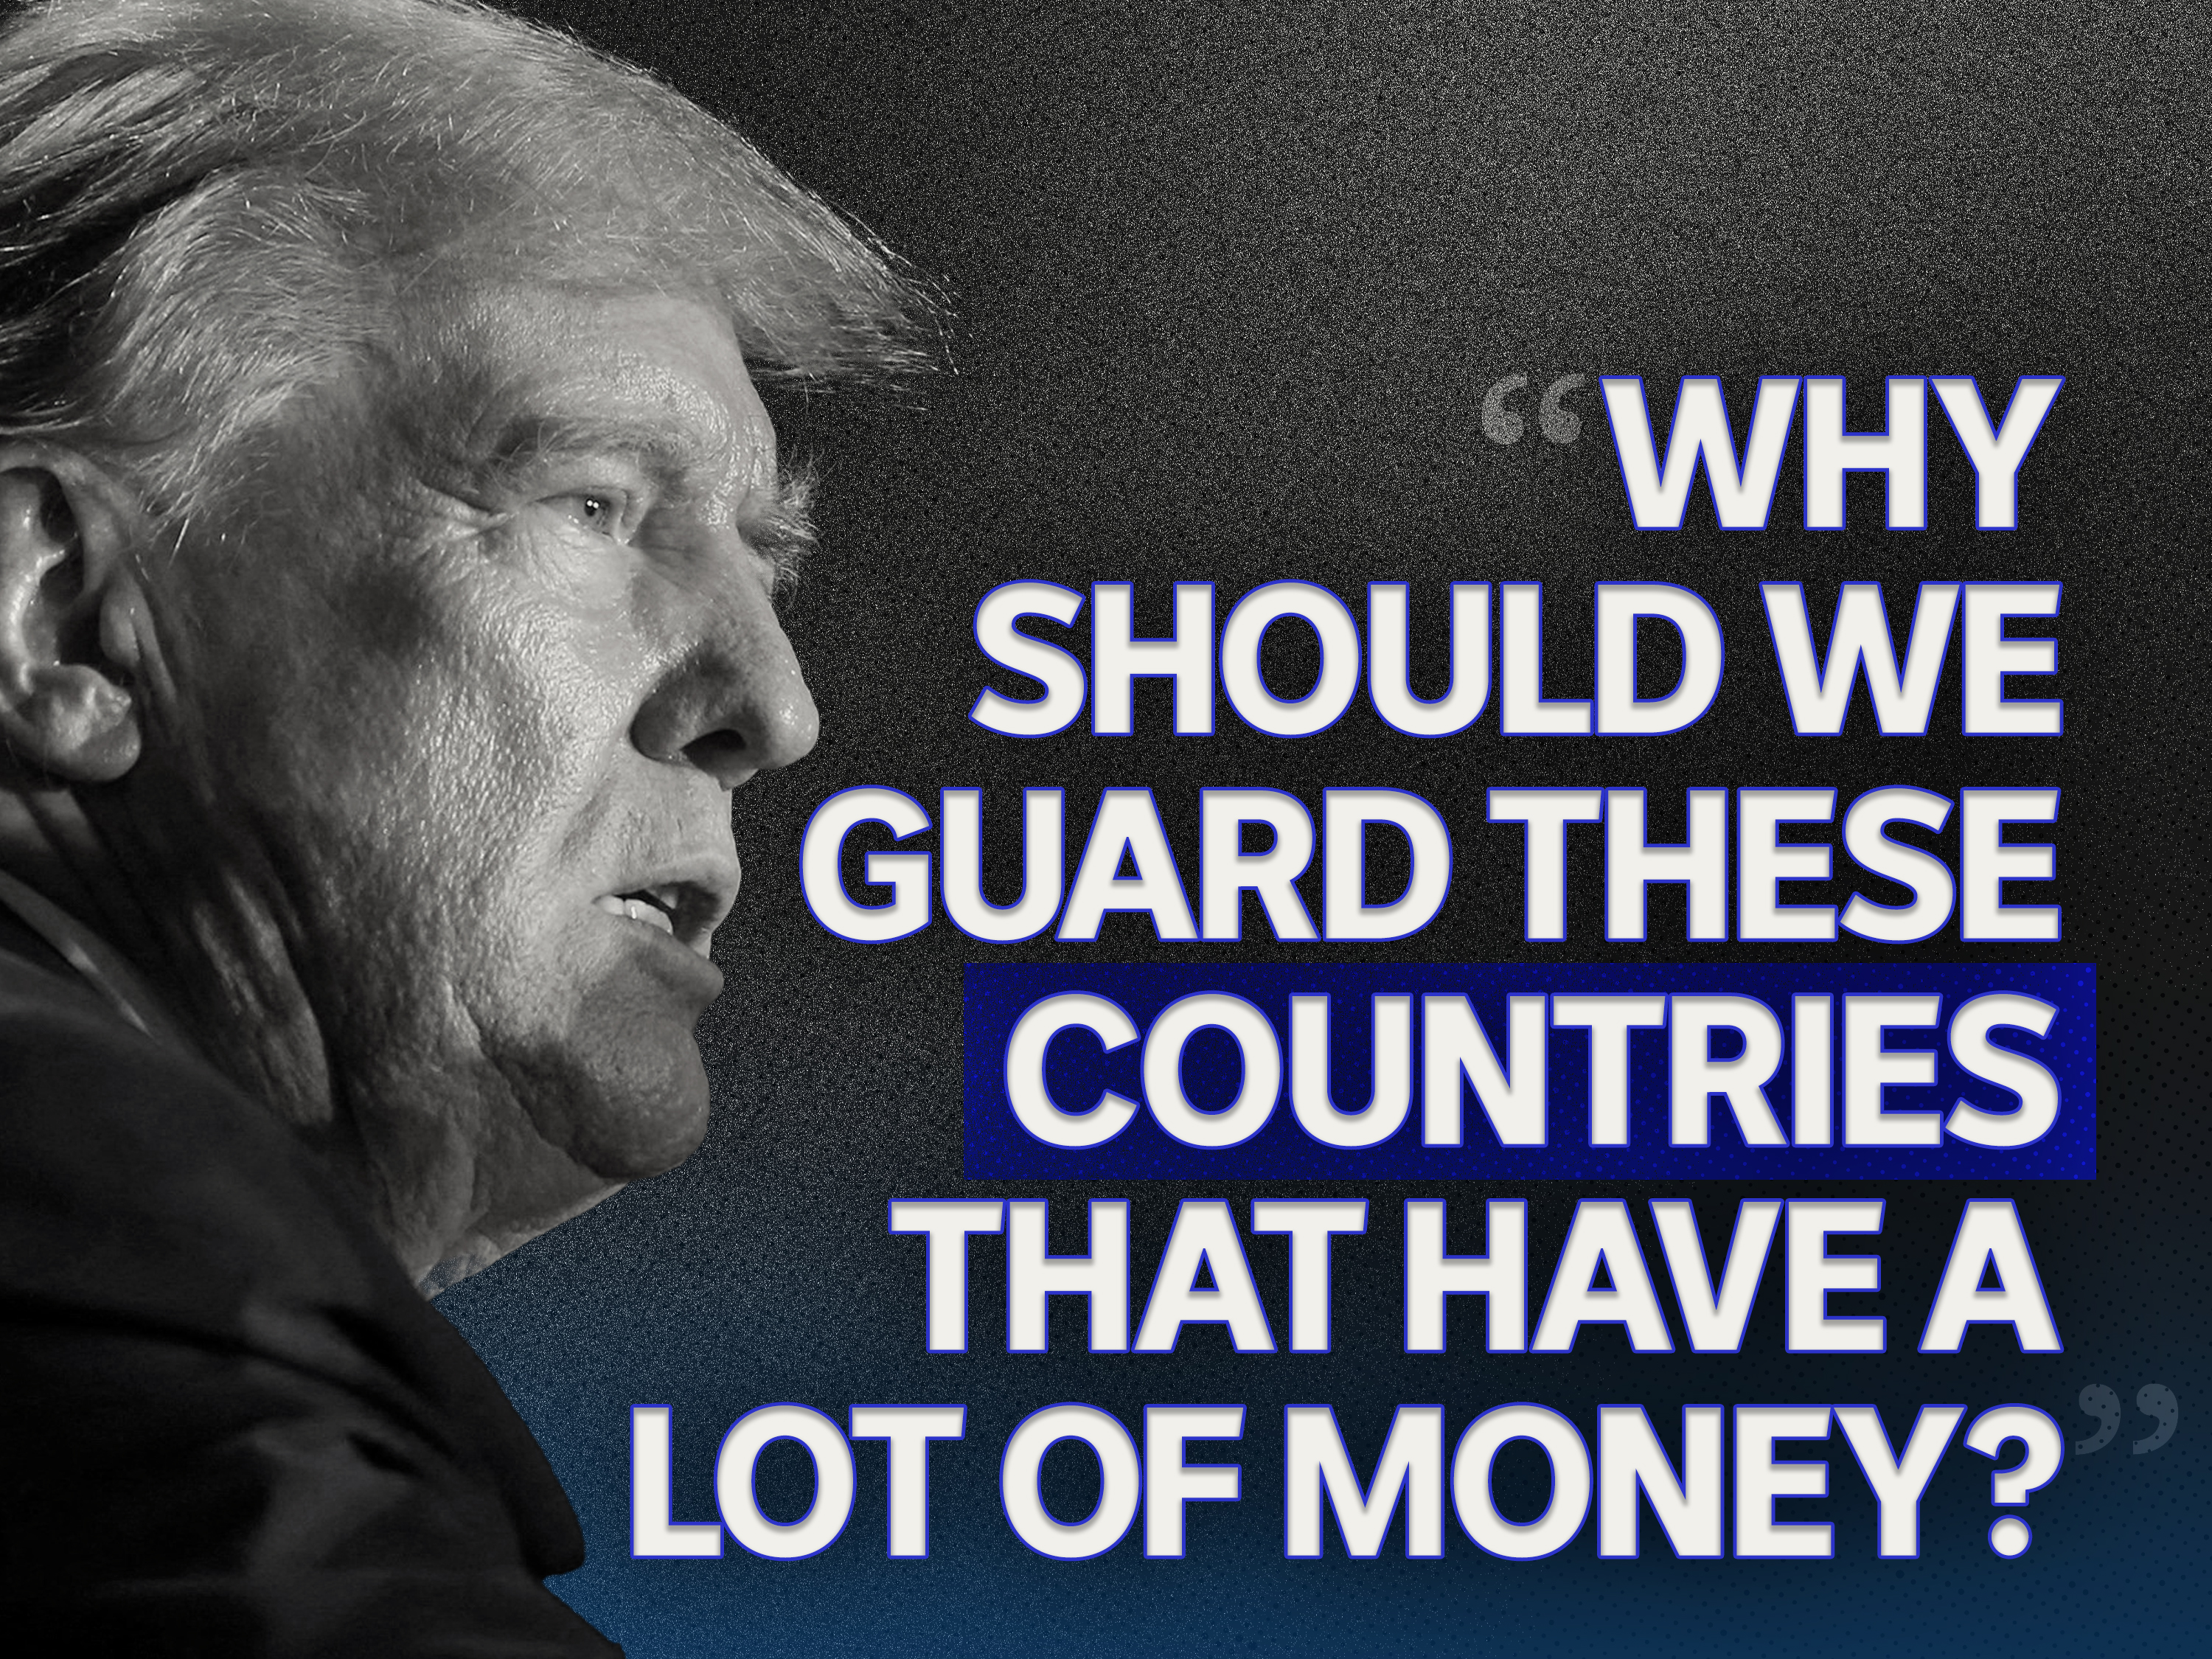 Donald Trump pictured with the words: Why should we guard these countries that have a lot of money?